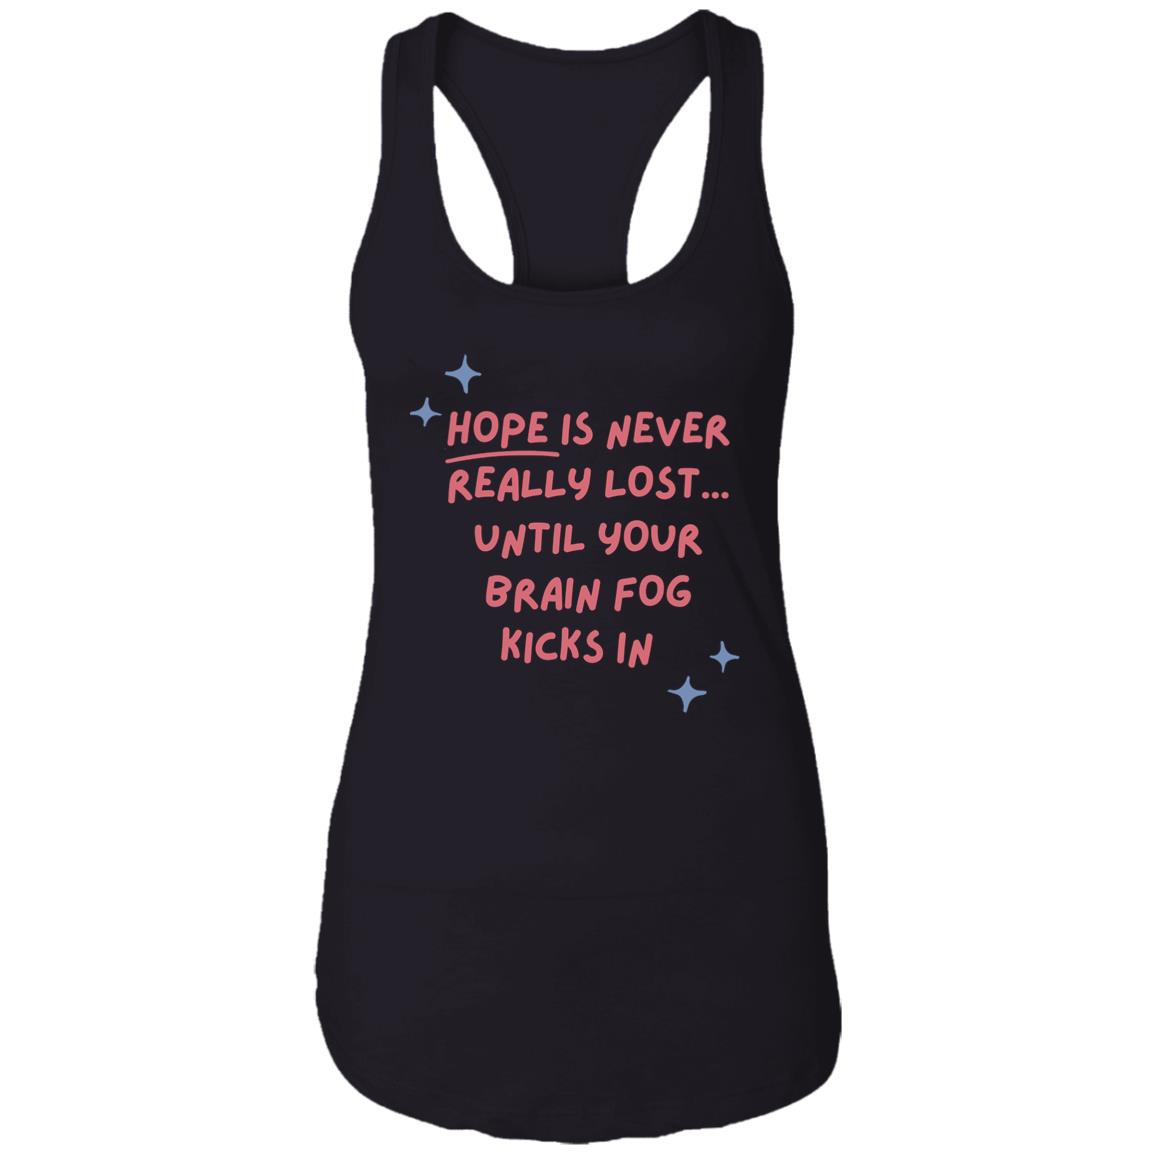 Hope Is Never Really Lost... Racerback Tank